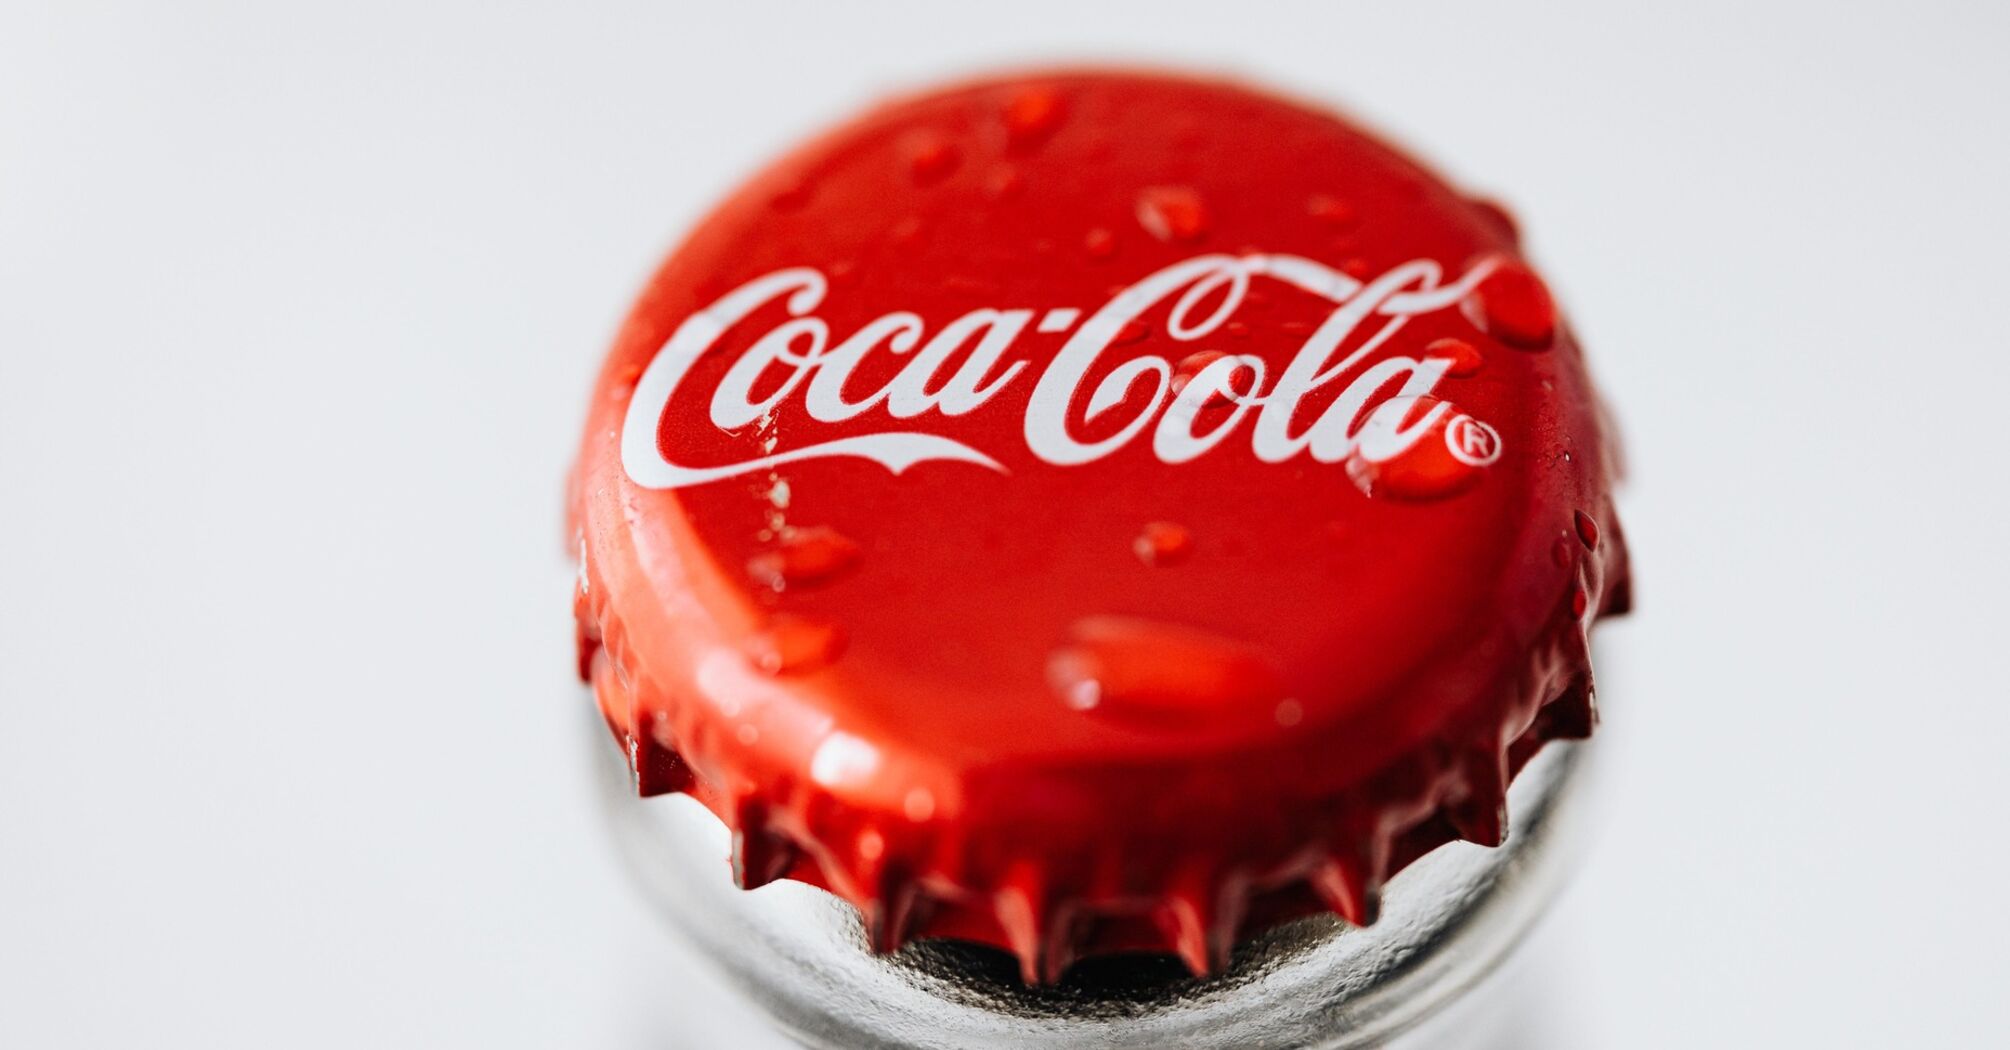 How to use cola in everyday life: 4 interesting tips